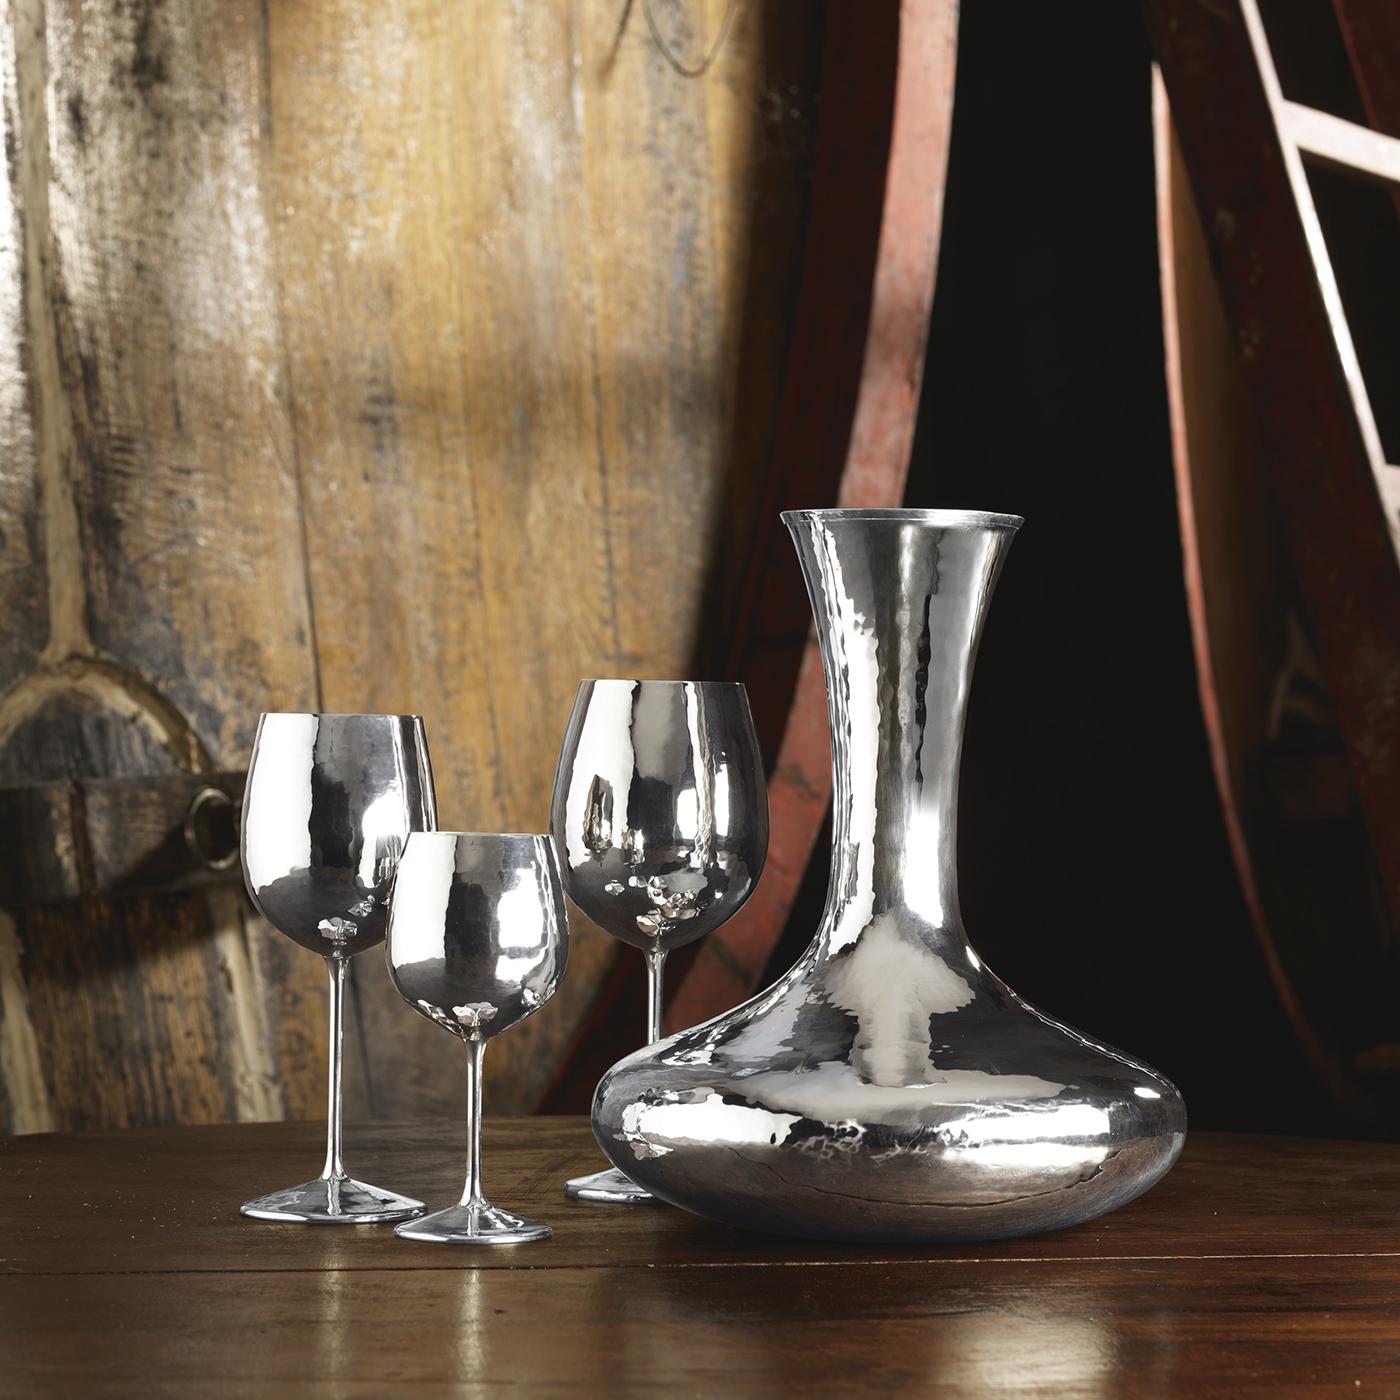 This elegant decanter combines the old world charm of drinking from a silver container with a sleek, modern look. Silver is famed for its antibacterial and antimicrobial properties, making it the perfect storage material for any liquor. It is